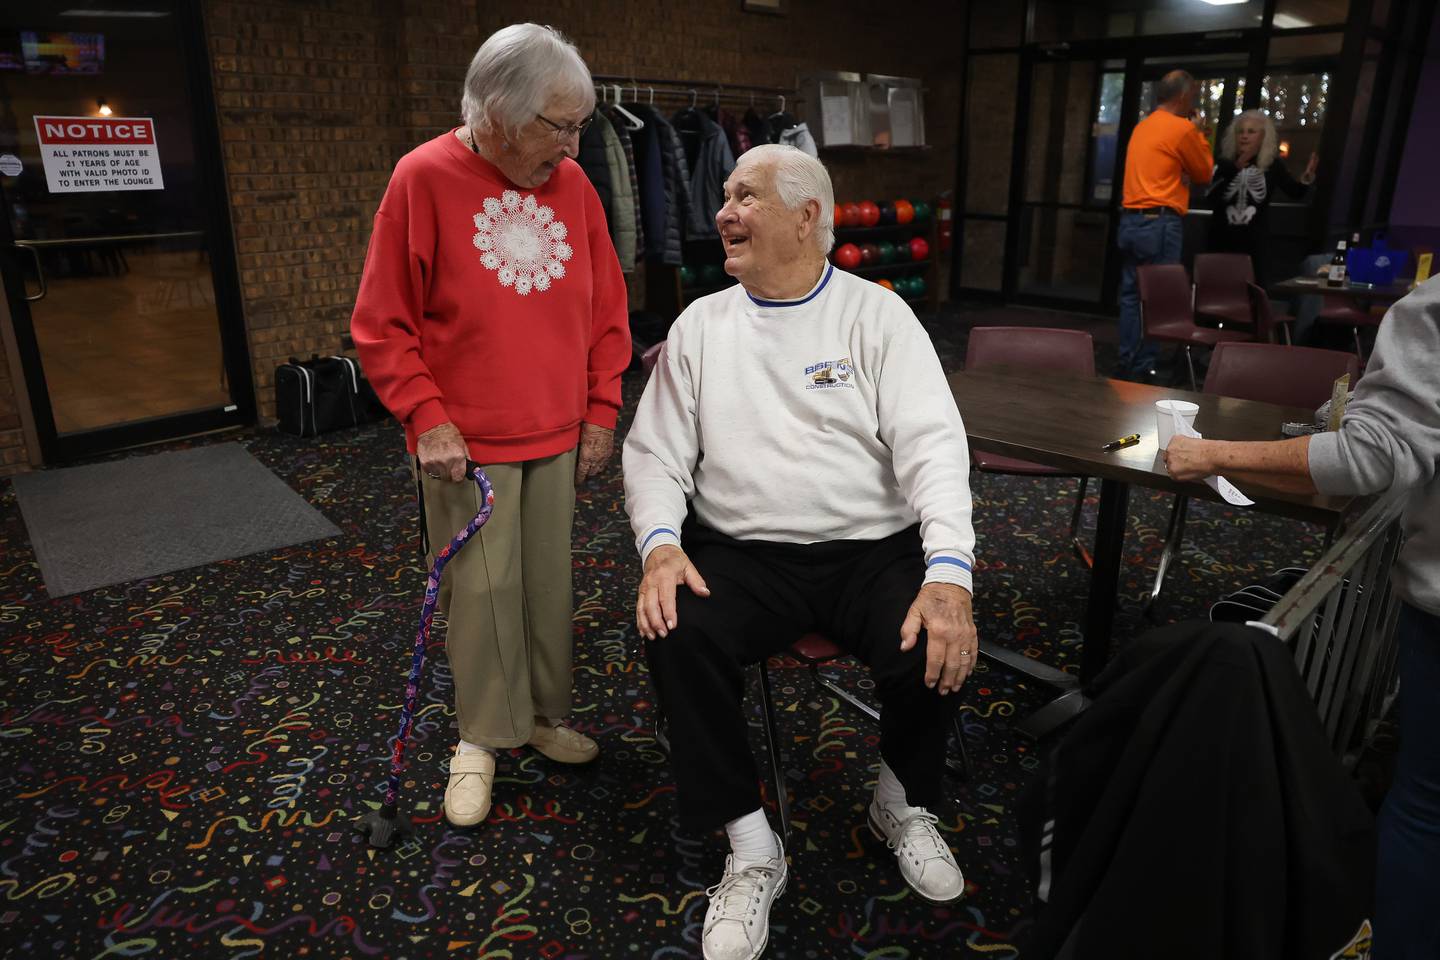 Betty Orlando talks with fellow bowler Tom Bojan, who joined the league in the mid 90’s, at Laraway Lanes on Monday, Oct. 30, 2023 in New Lenox. Betty, who turns a 100 in December, and her late husband Mike started Monday Senior Bowling Night in 1980.